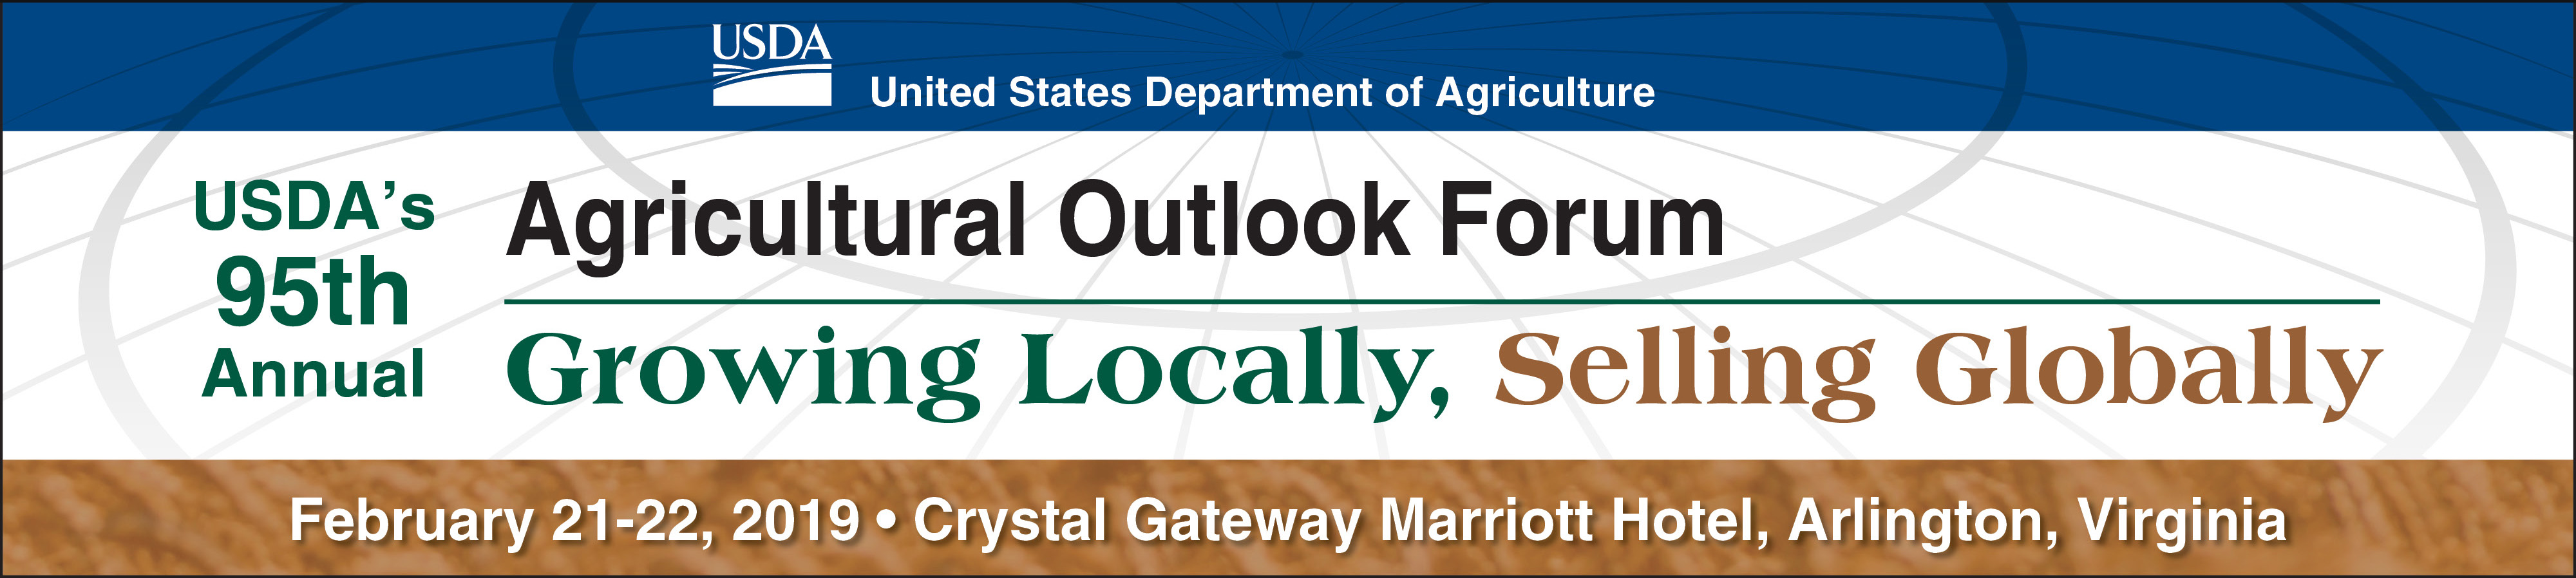 Registration site: 2019 Agricultural Outlook Forum, Growing Locally, Selling Globally , February 21-22, 2019, Crystal Gateway Marriott Hotel, Arlington, Virginia. Note: To register by phone, call 703-925-9455, x113 or toll free 1-844-430-7073